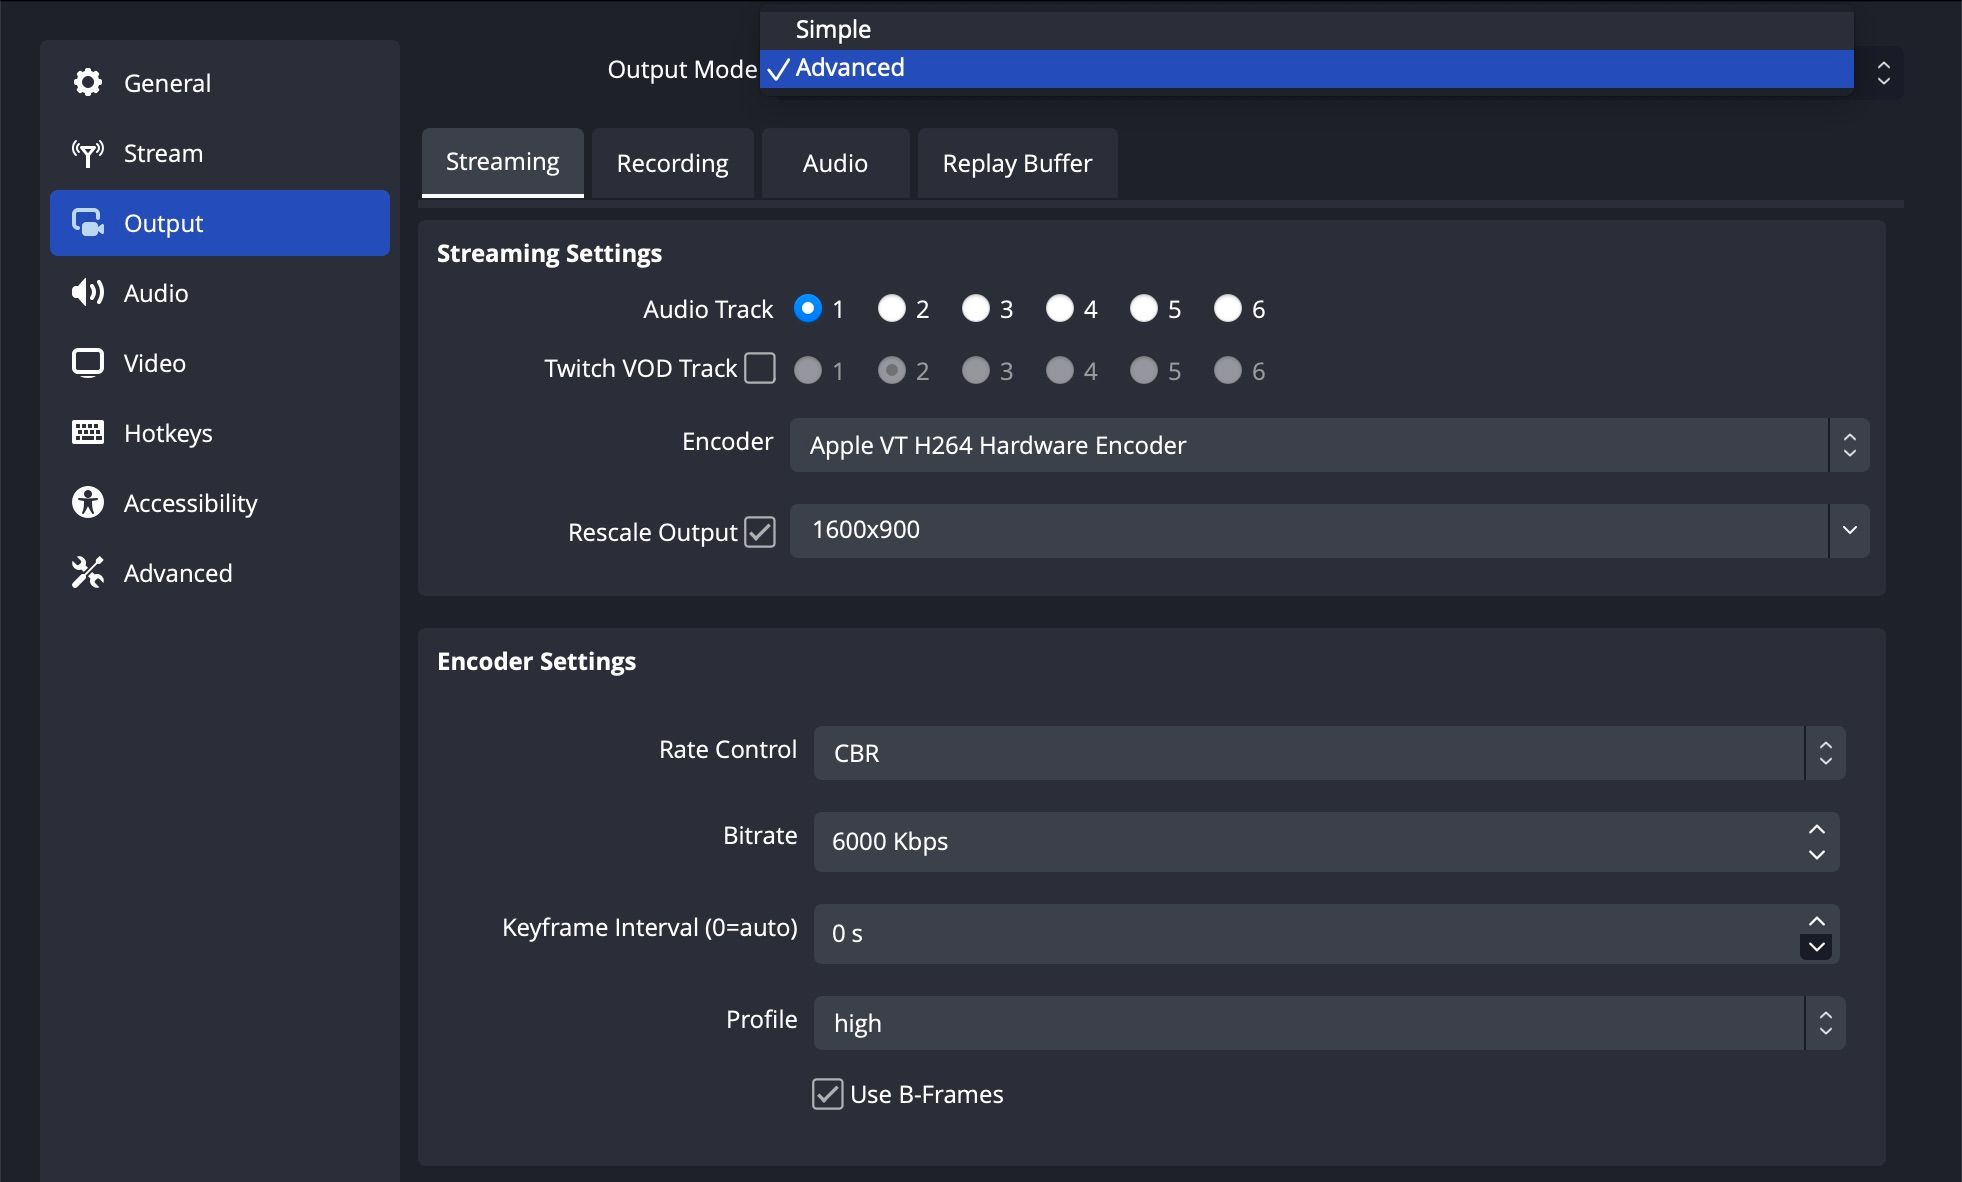 How to enable advanced output settings in OBS